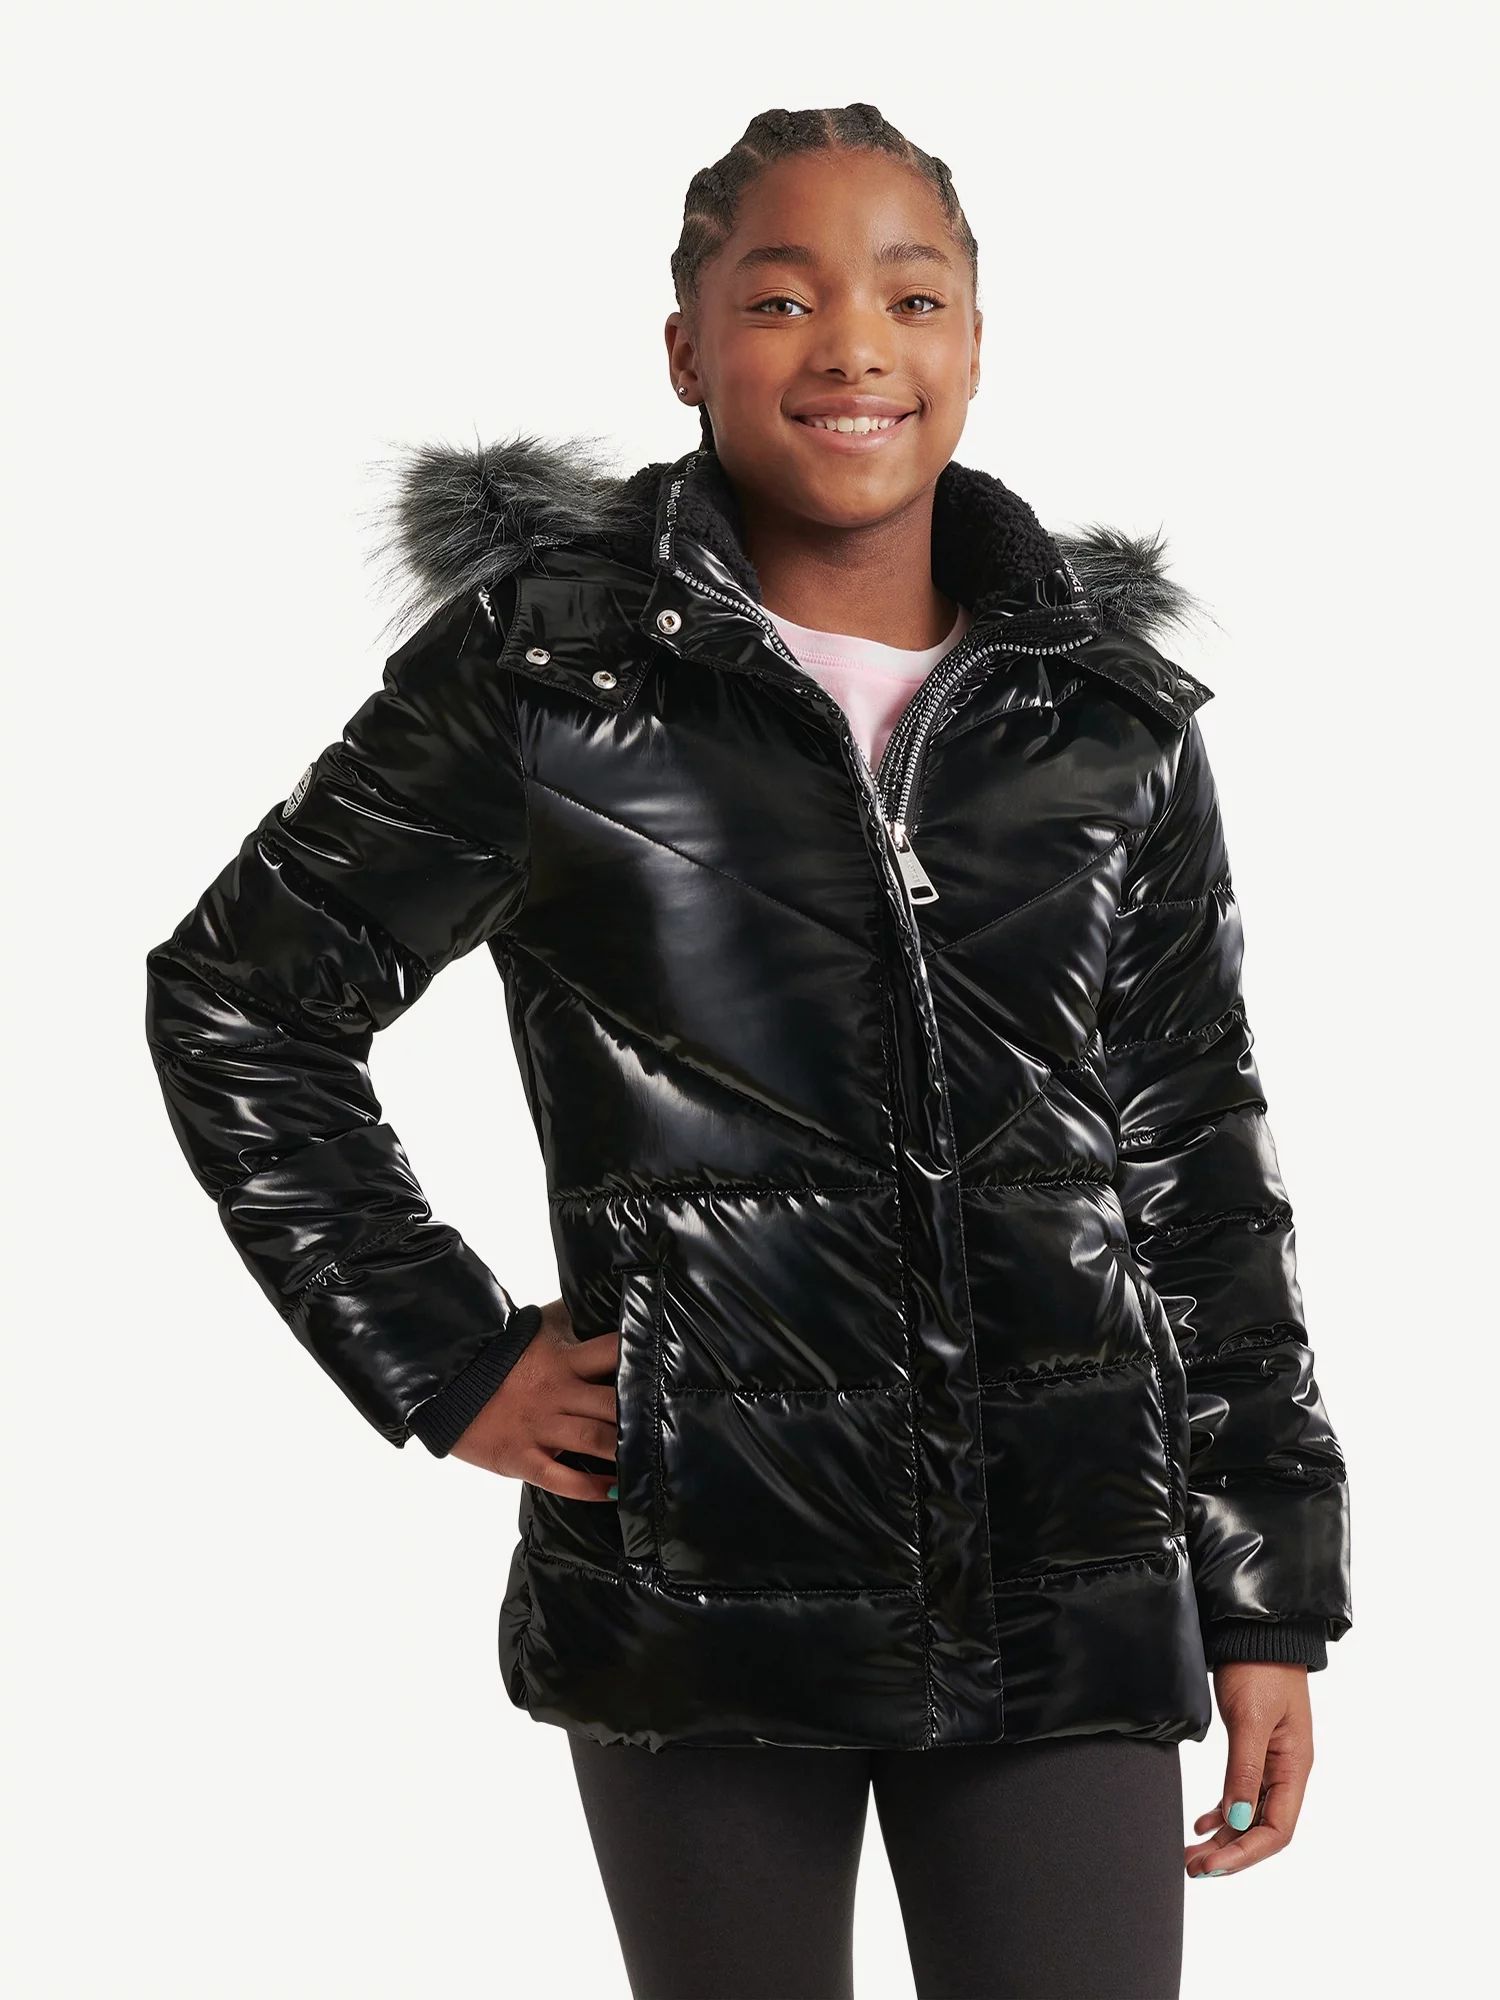 Justice Girls Puffer Jacket with Faux Fur Lined Hood, Sizes 5-18 | Walmart (US)